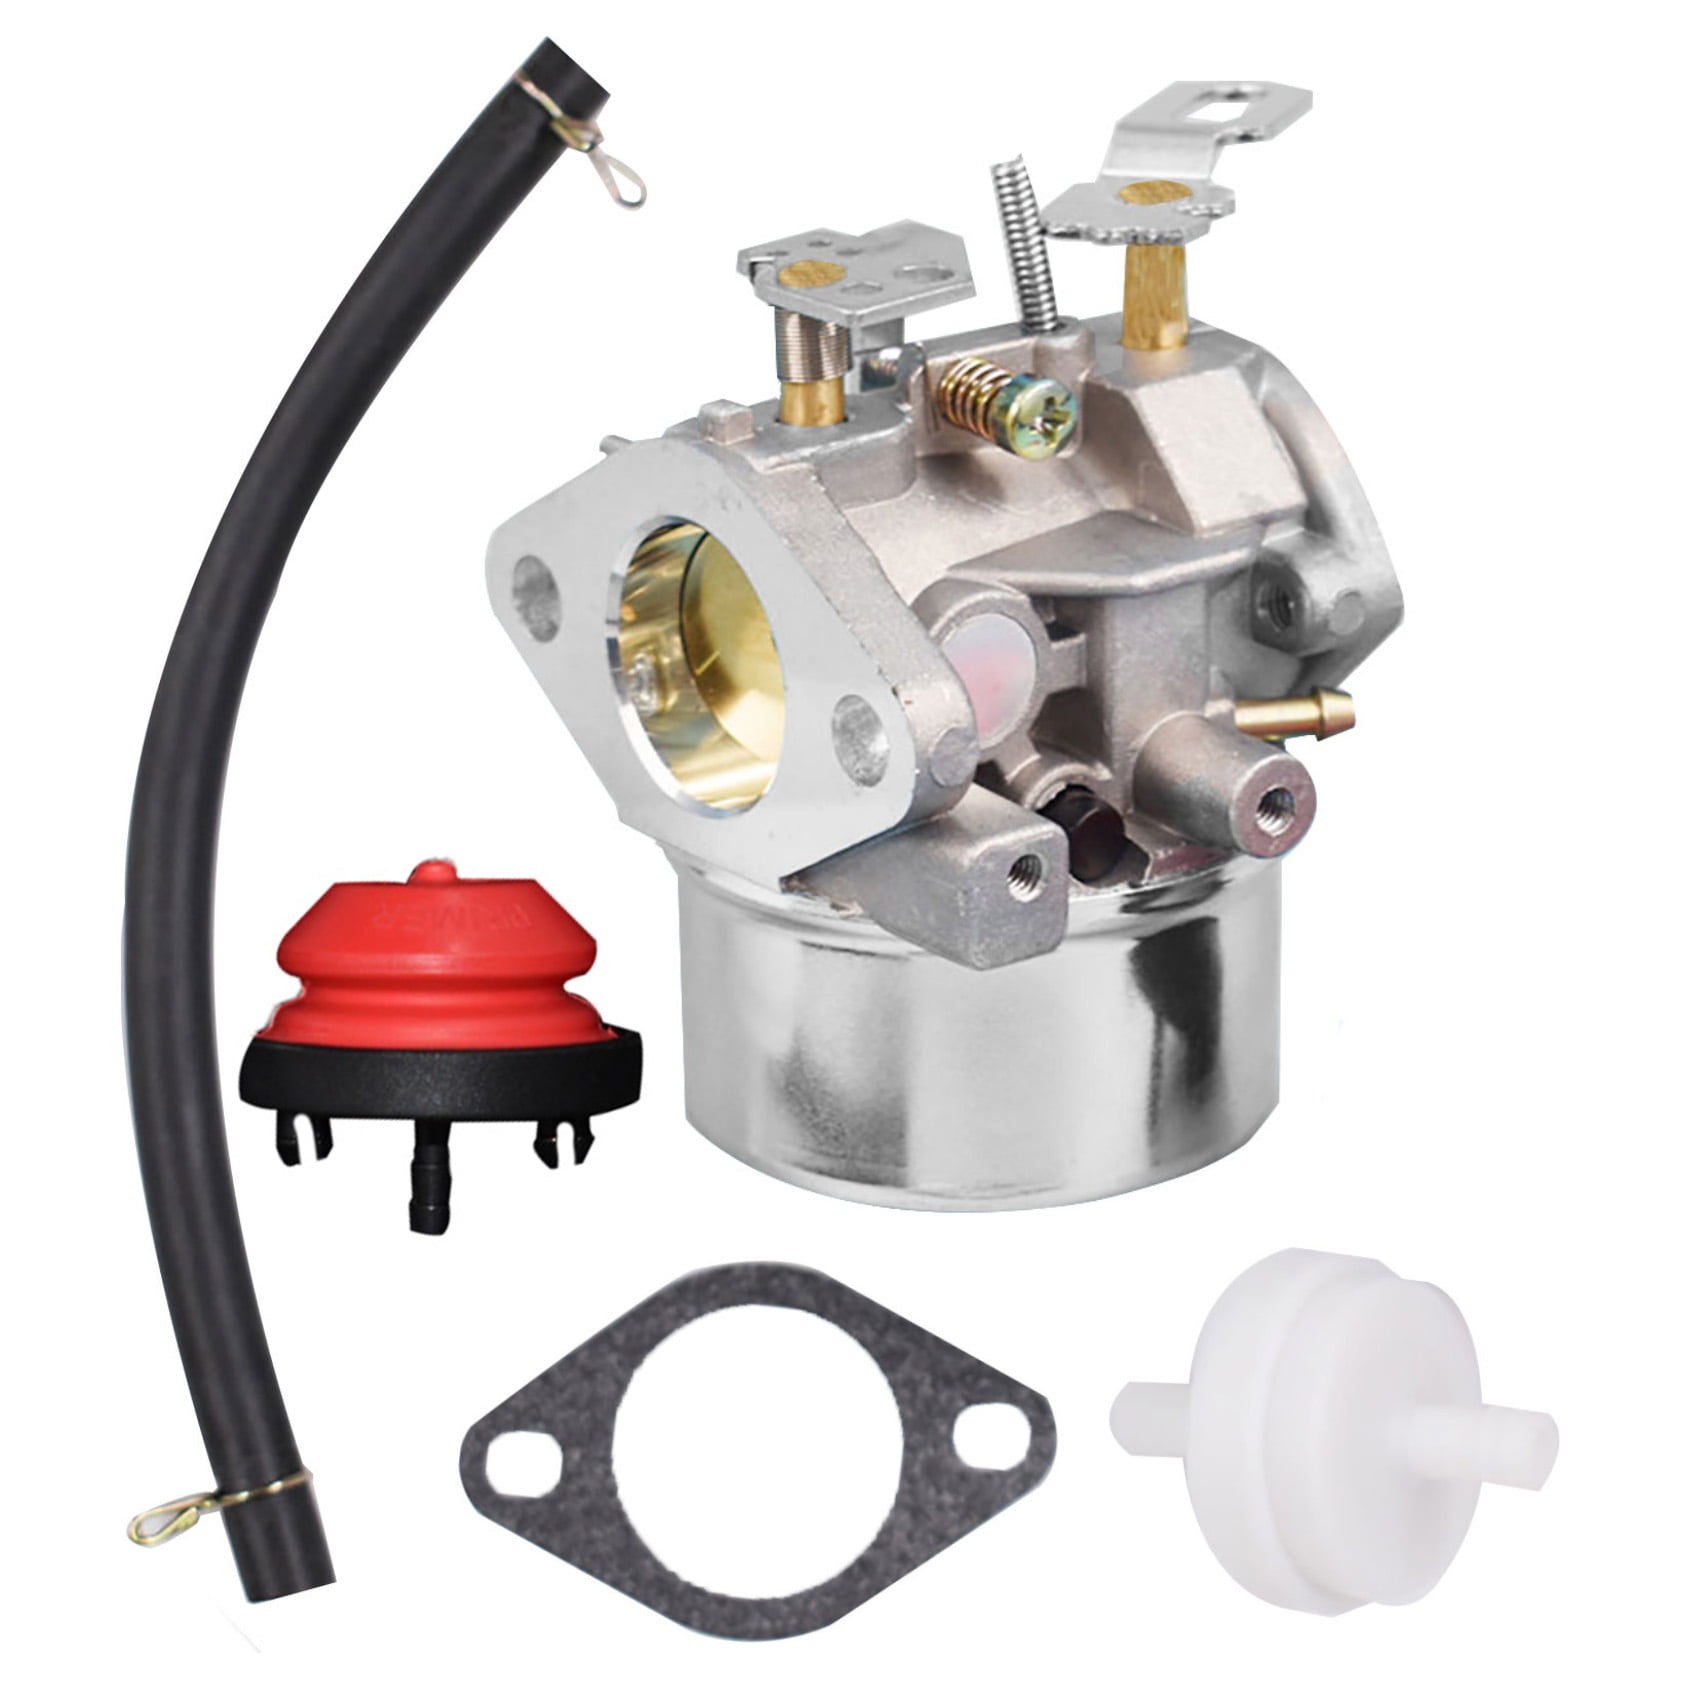 New Carburetor For Ariens Snow Blowers 924108 924110 924328 ST824SLE ST824DLE 